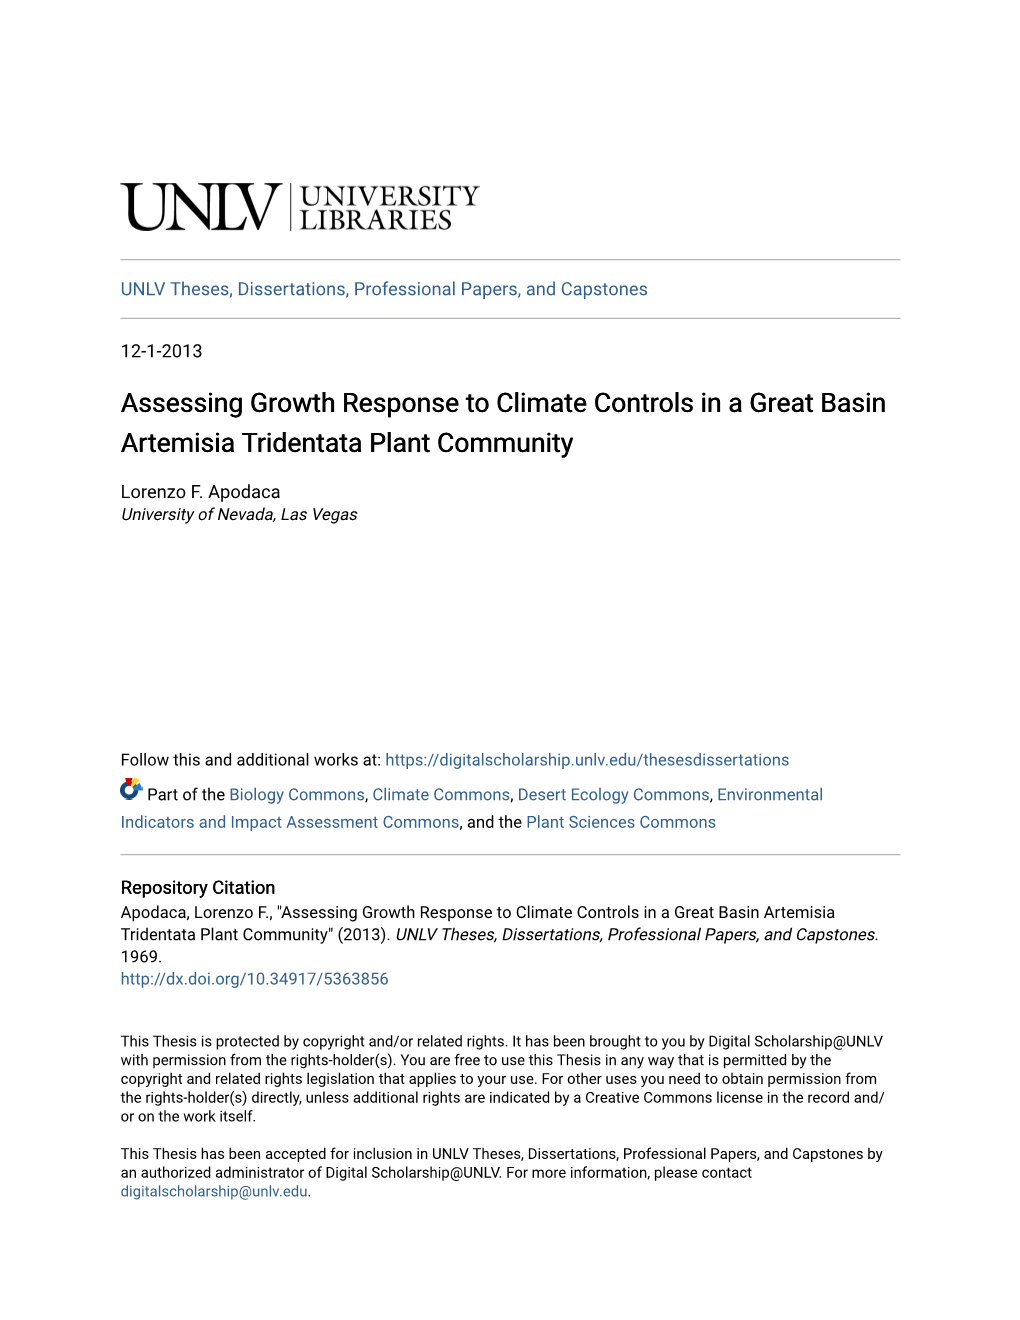 Assessing Growth Response to Climate Controls in a Great Basin Artemisia Tridentata Plant Community